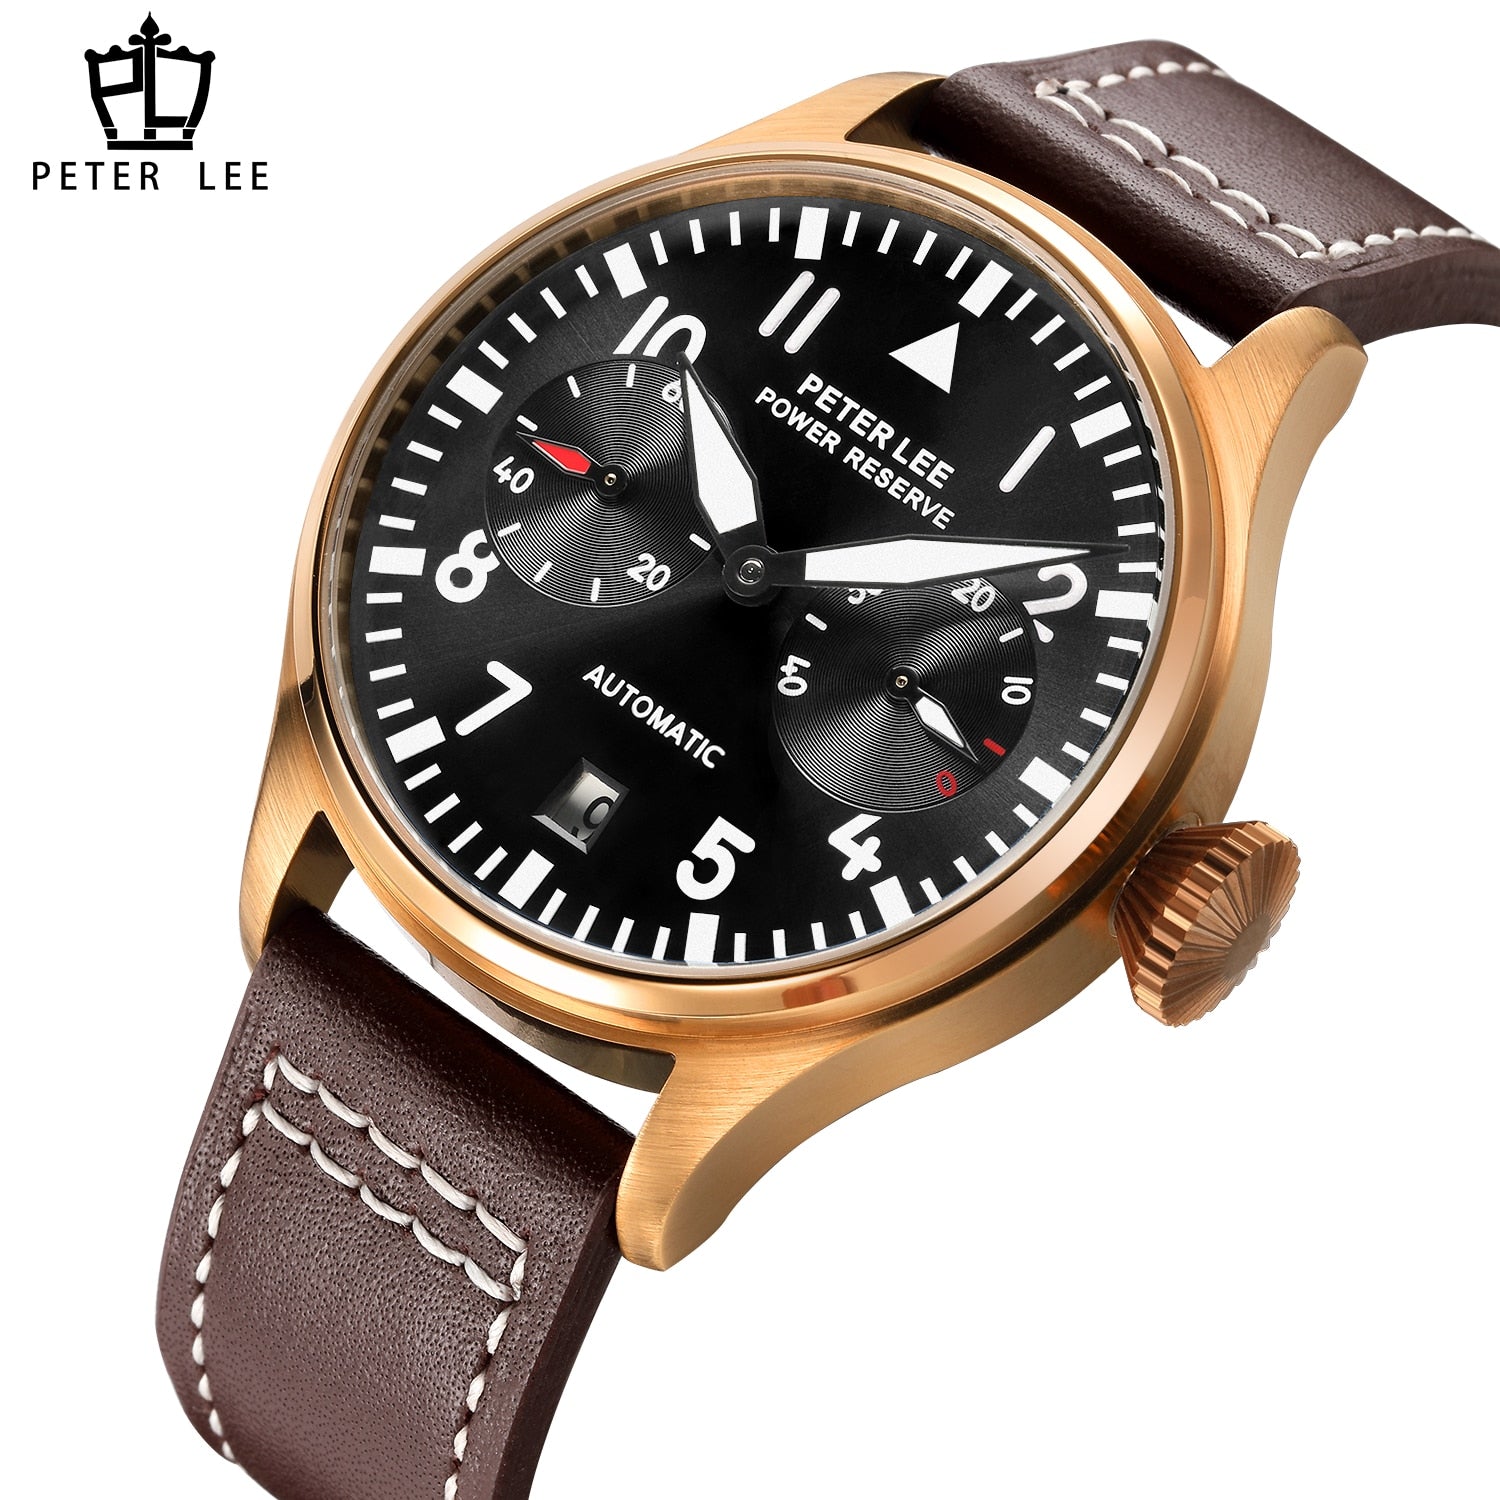 New PETER LEE Brand Casual Fashion Multi Dial Date Mechanical Watch For Men Luminous Leather Belt Digital Automatic Watches